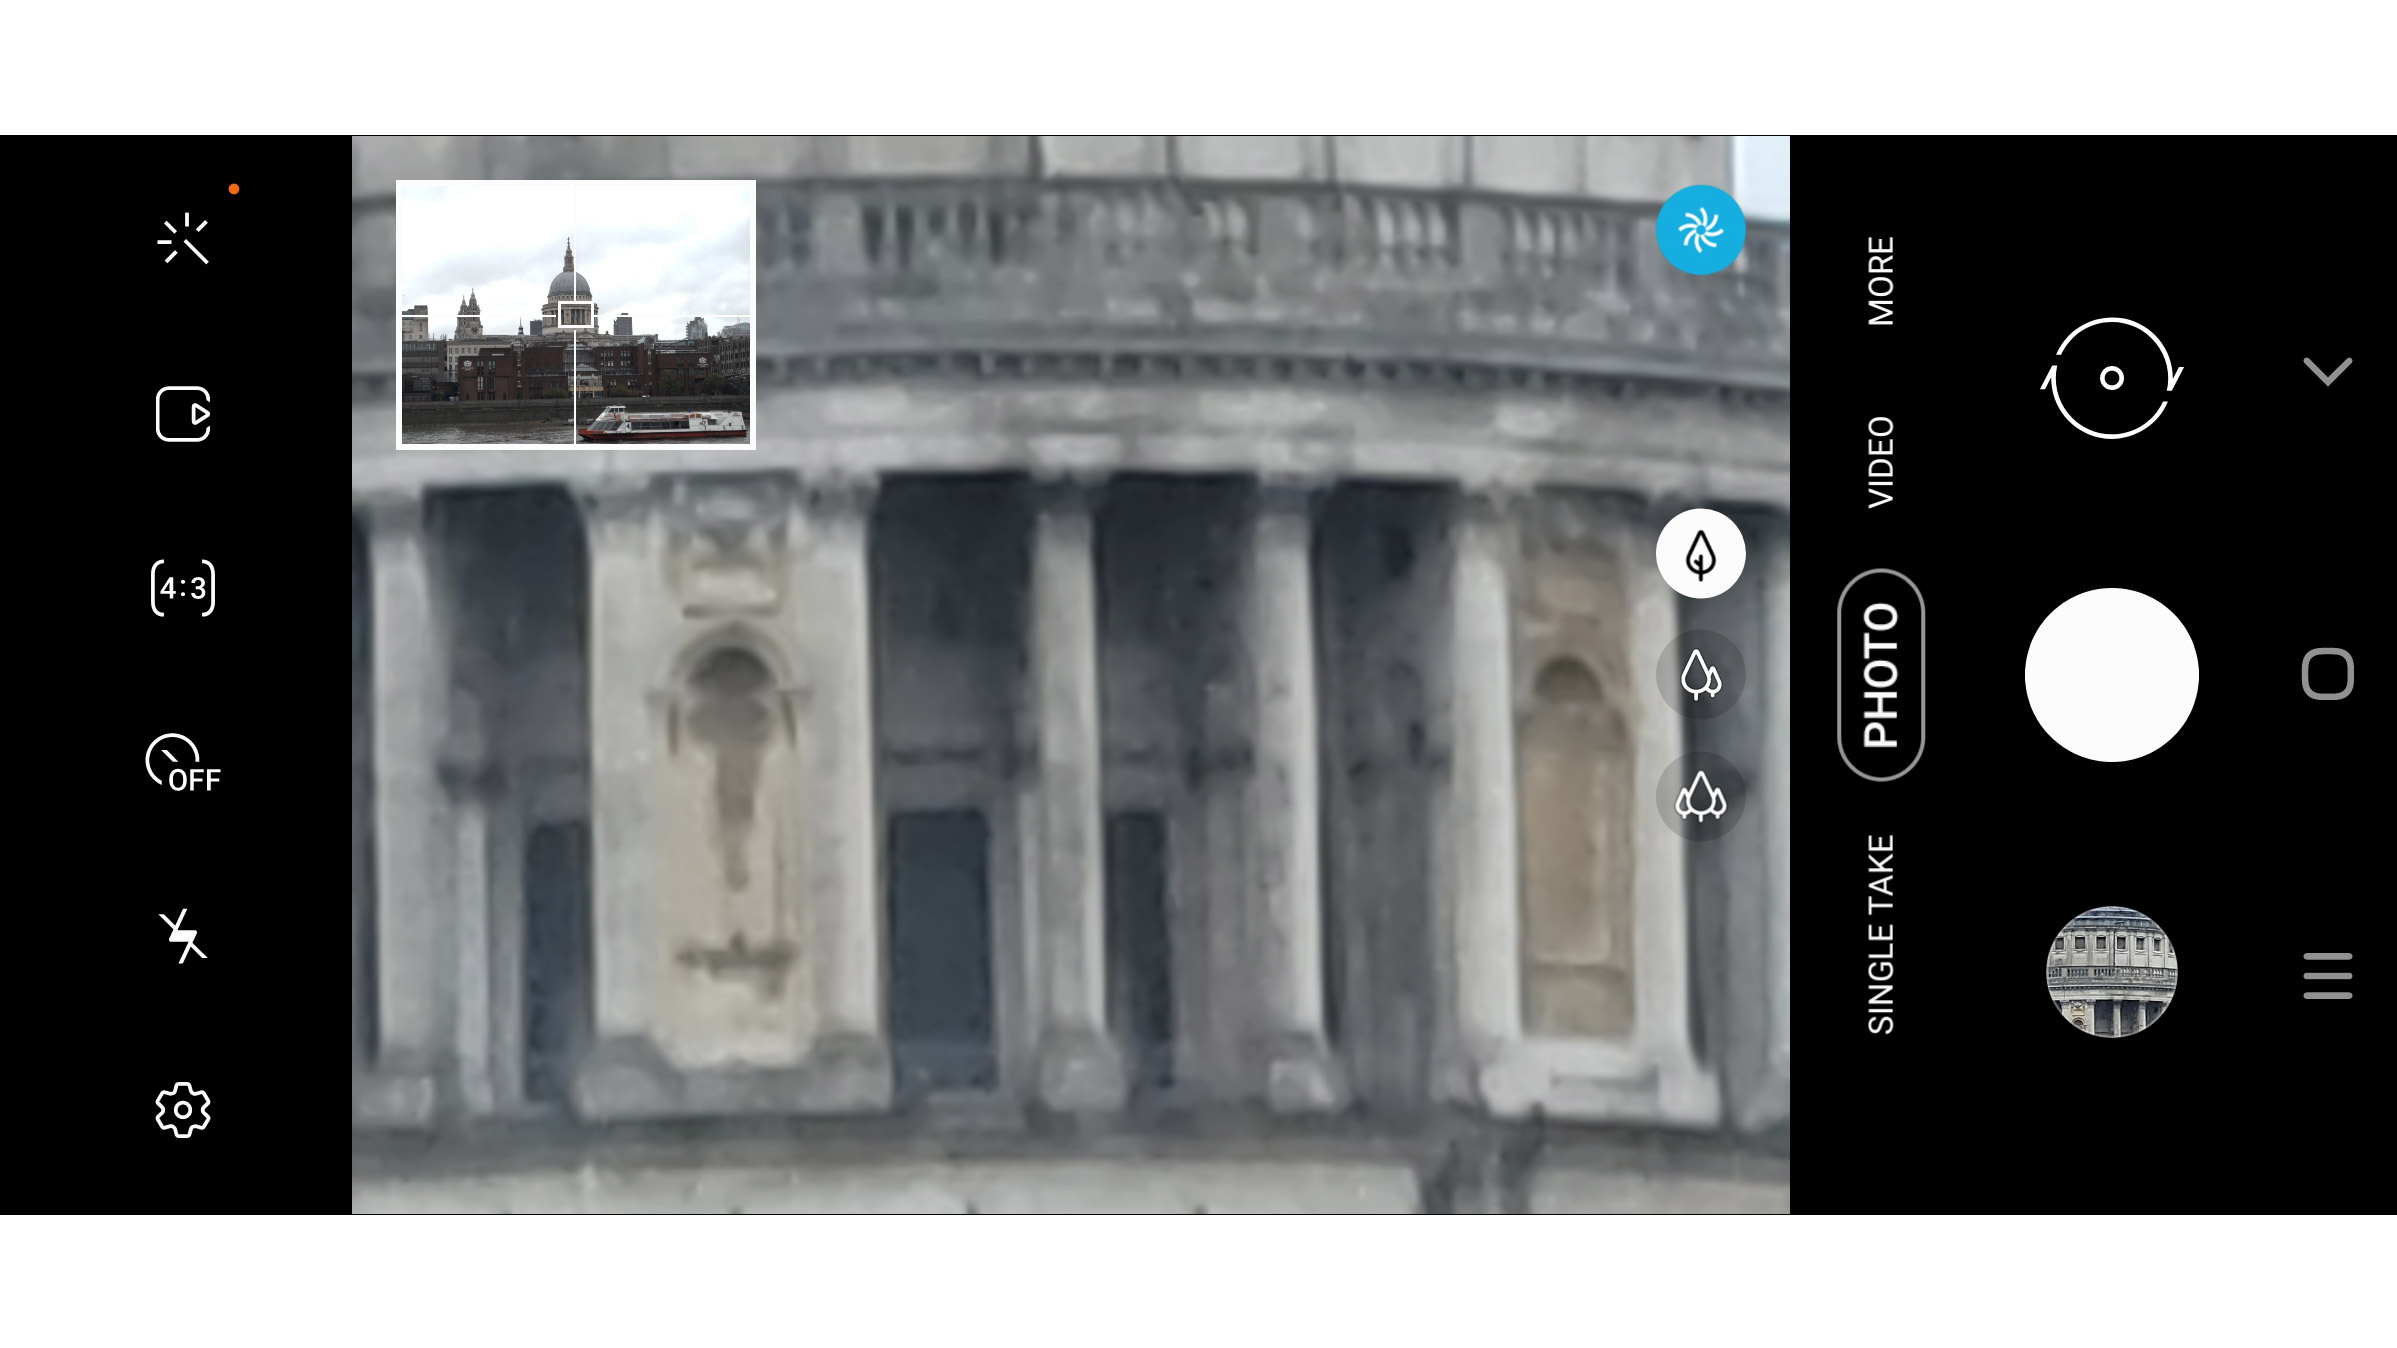 Zoomed in on St Paul's Cathedral